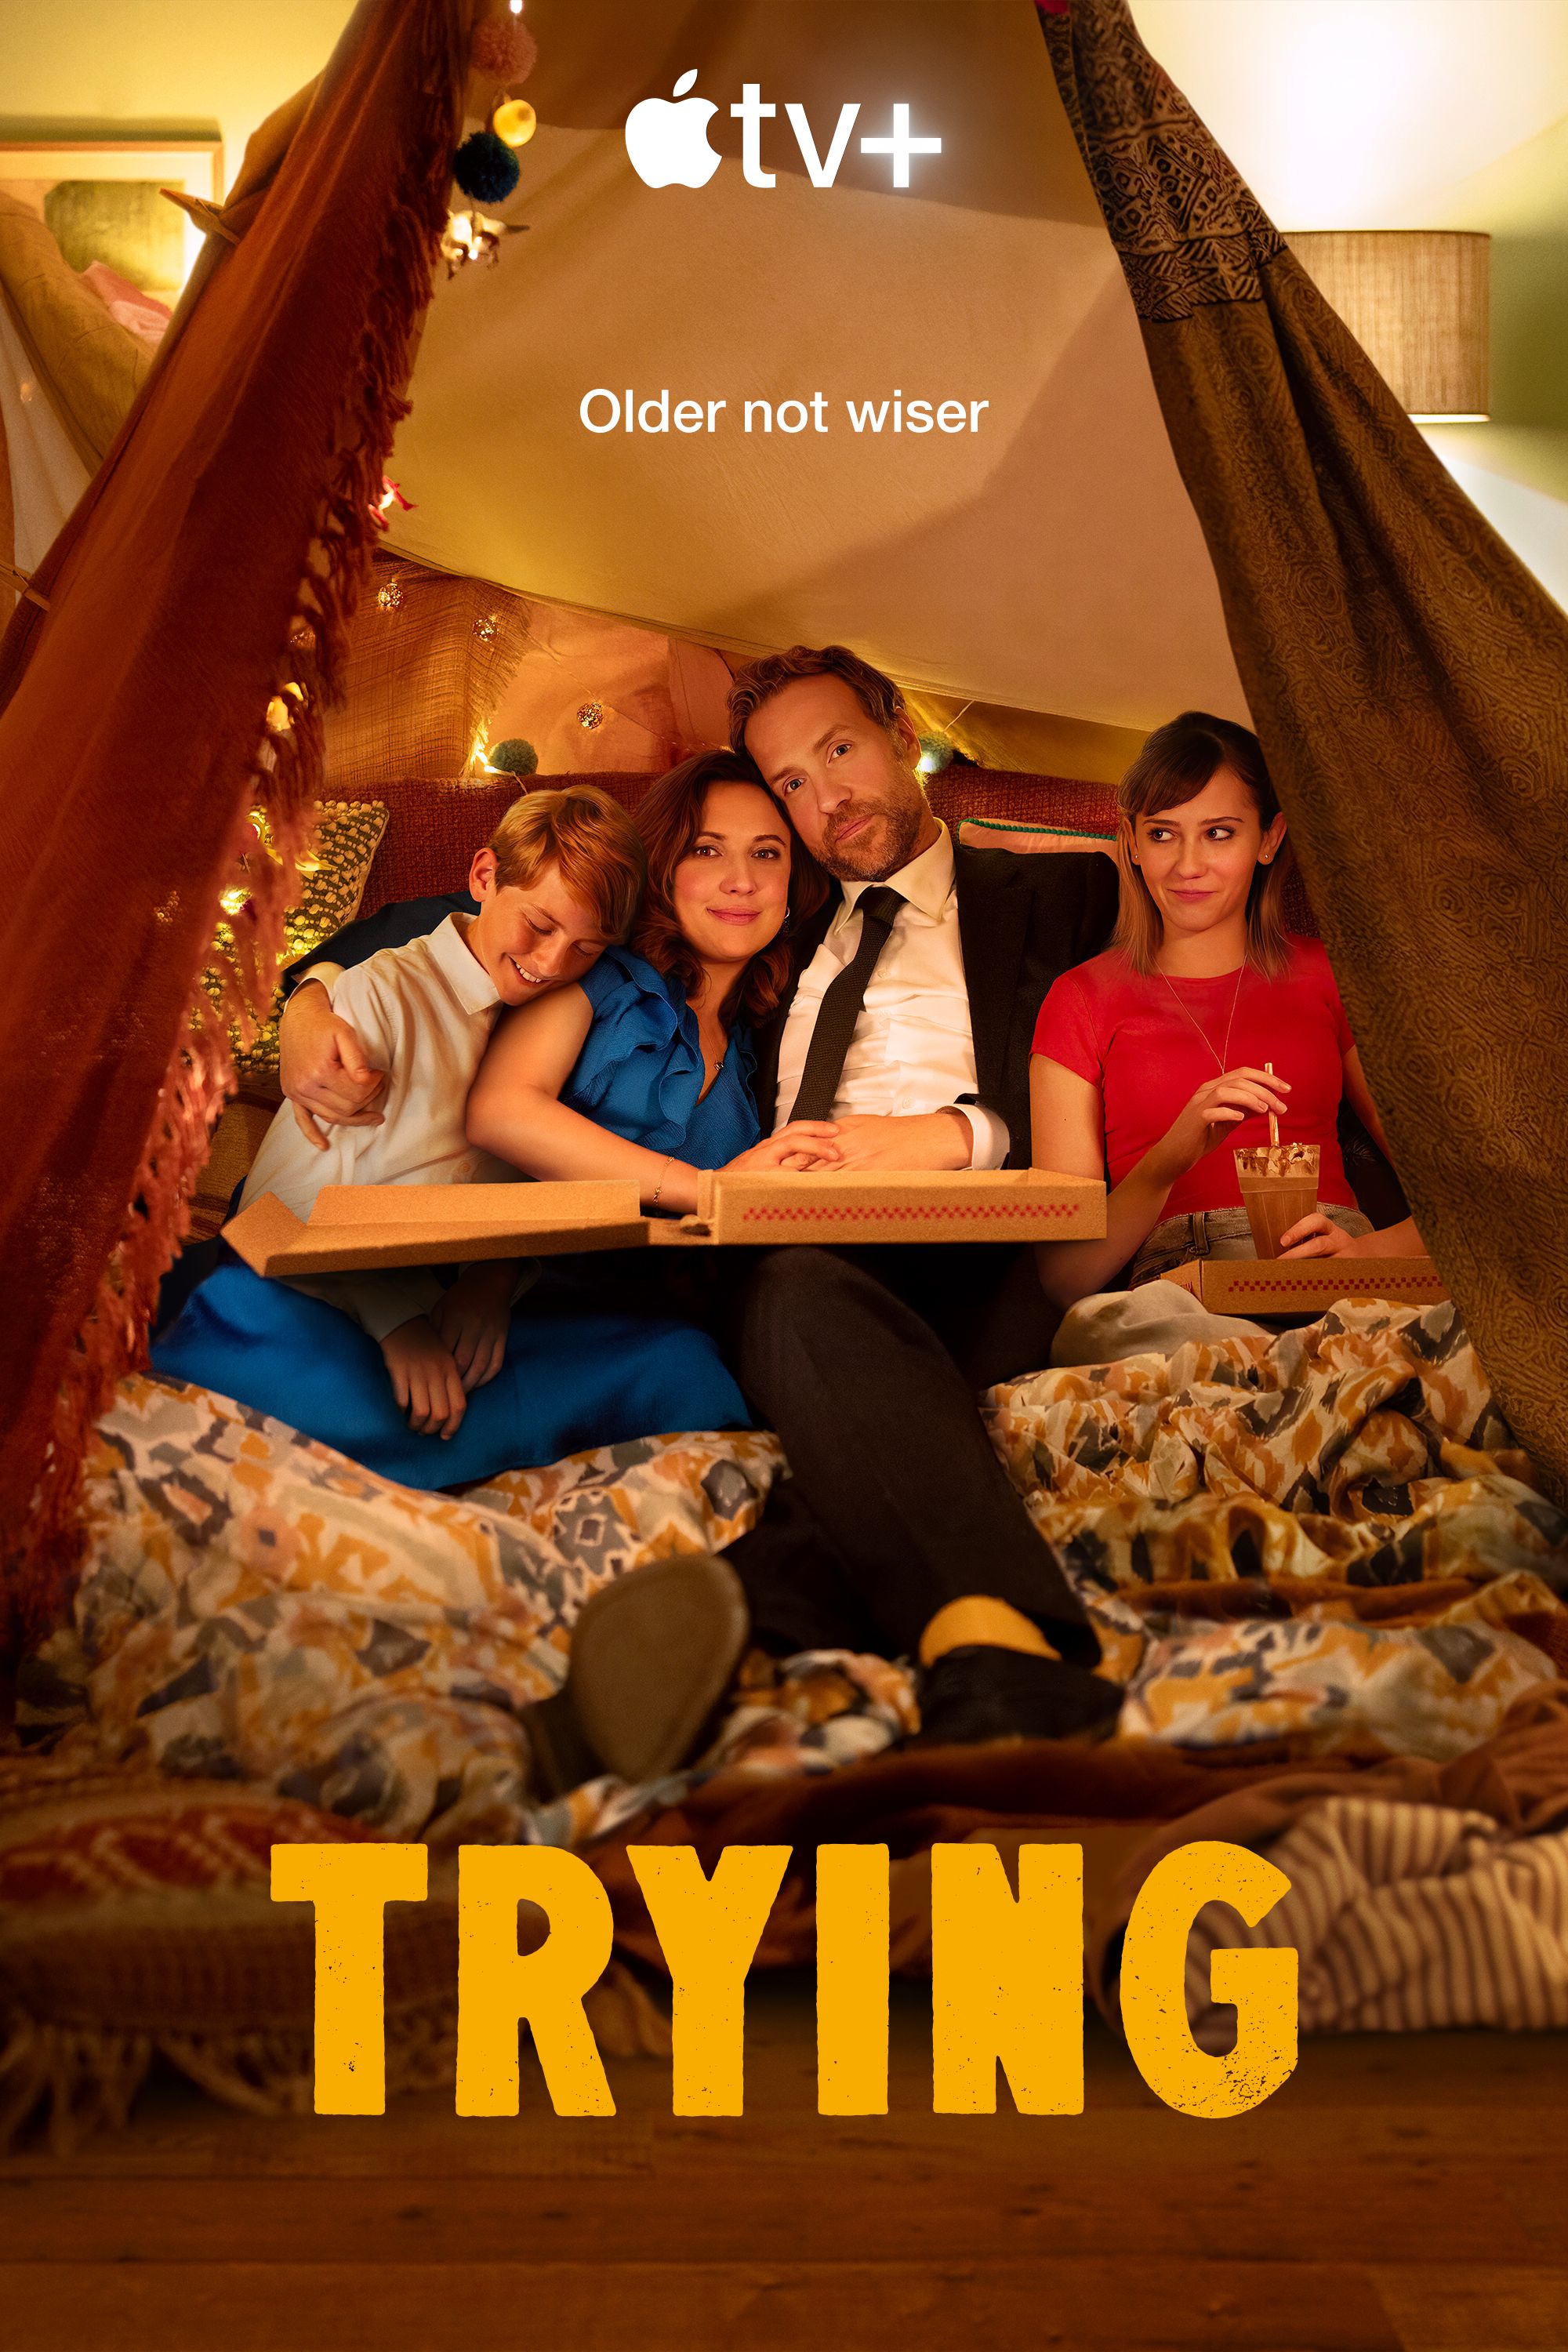 Rafe Spall and Esther Smith surrounded by two children in a tent for a promotional photo of Trying.